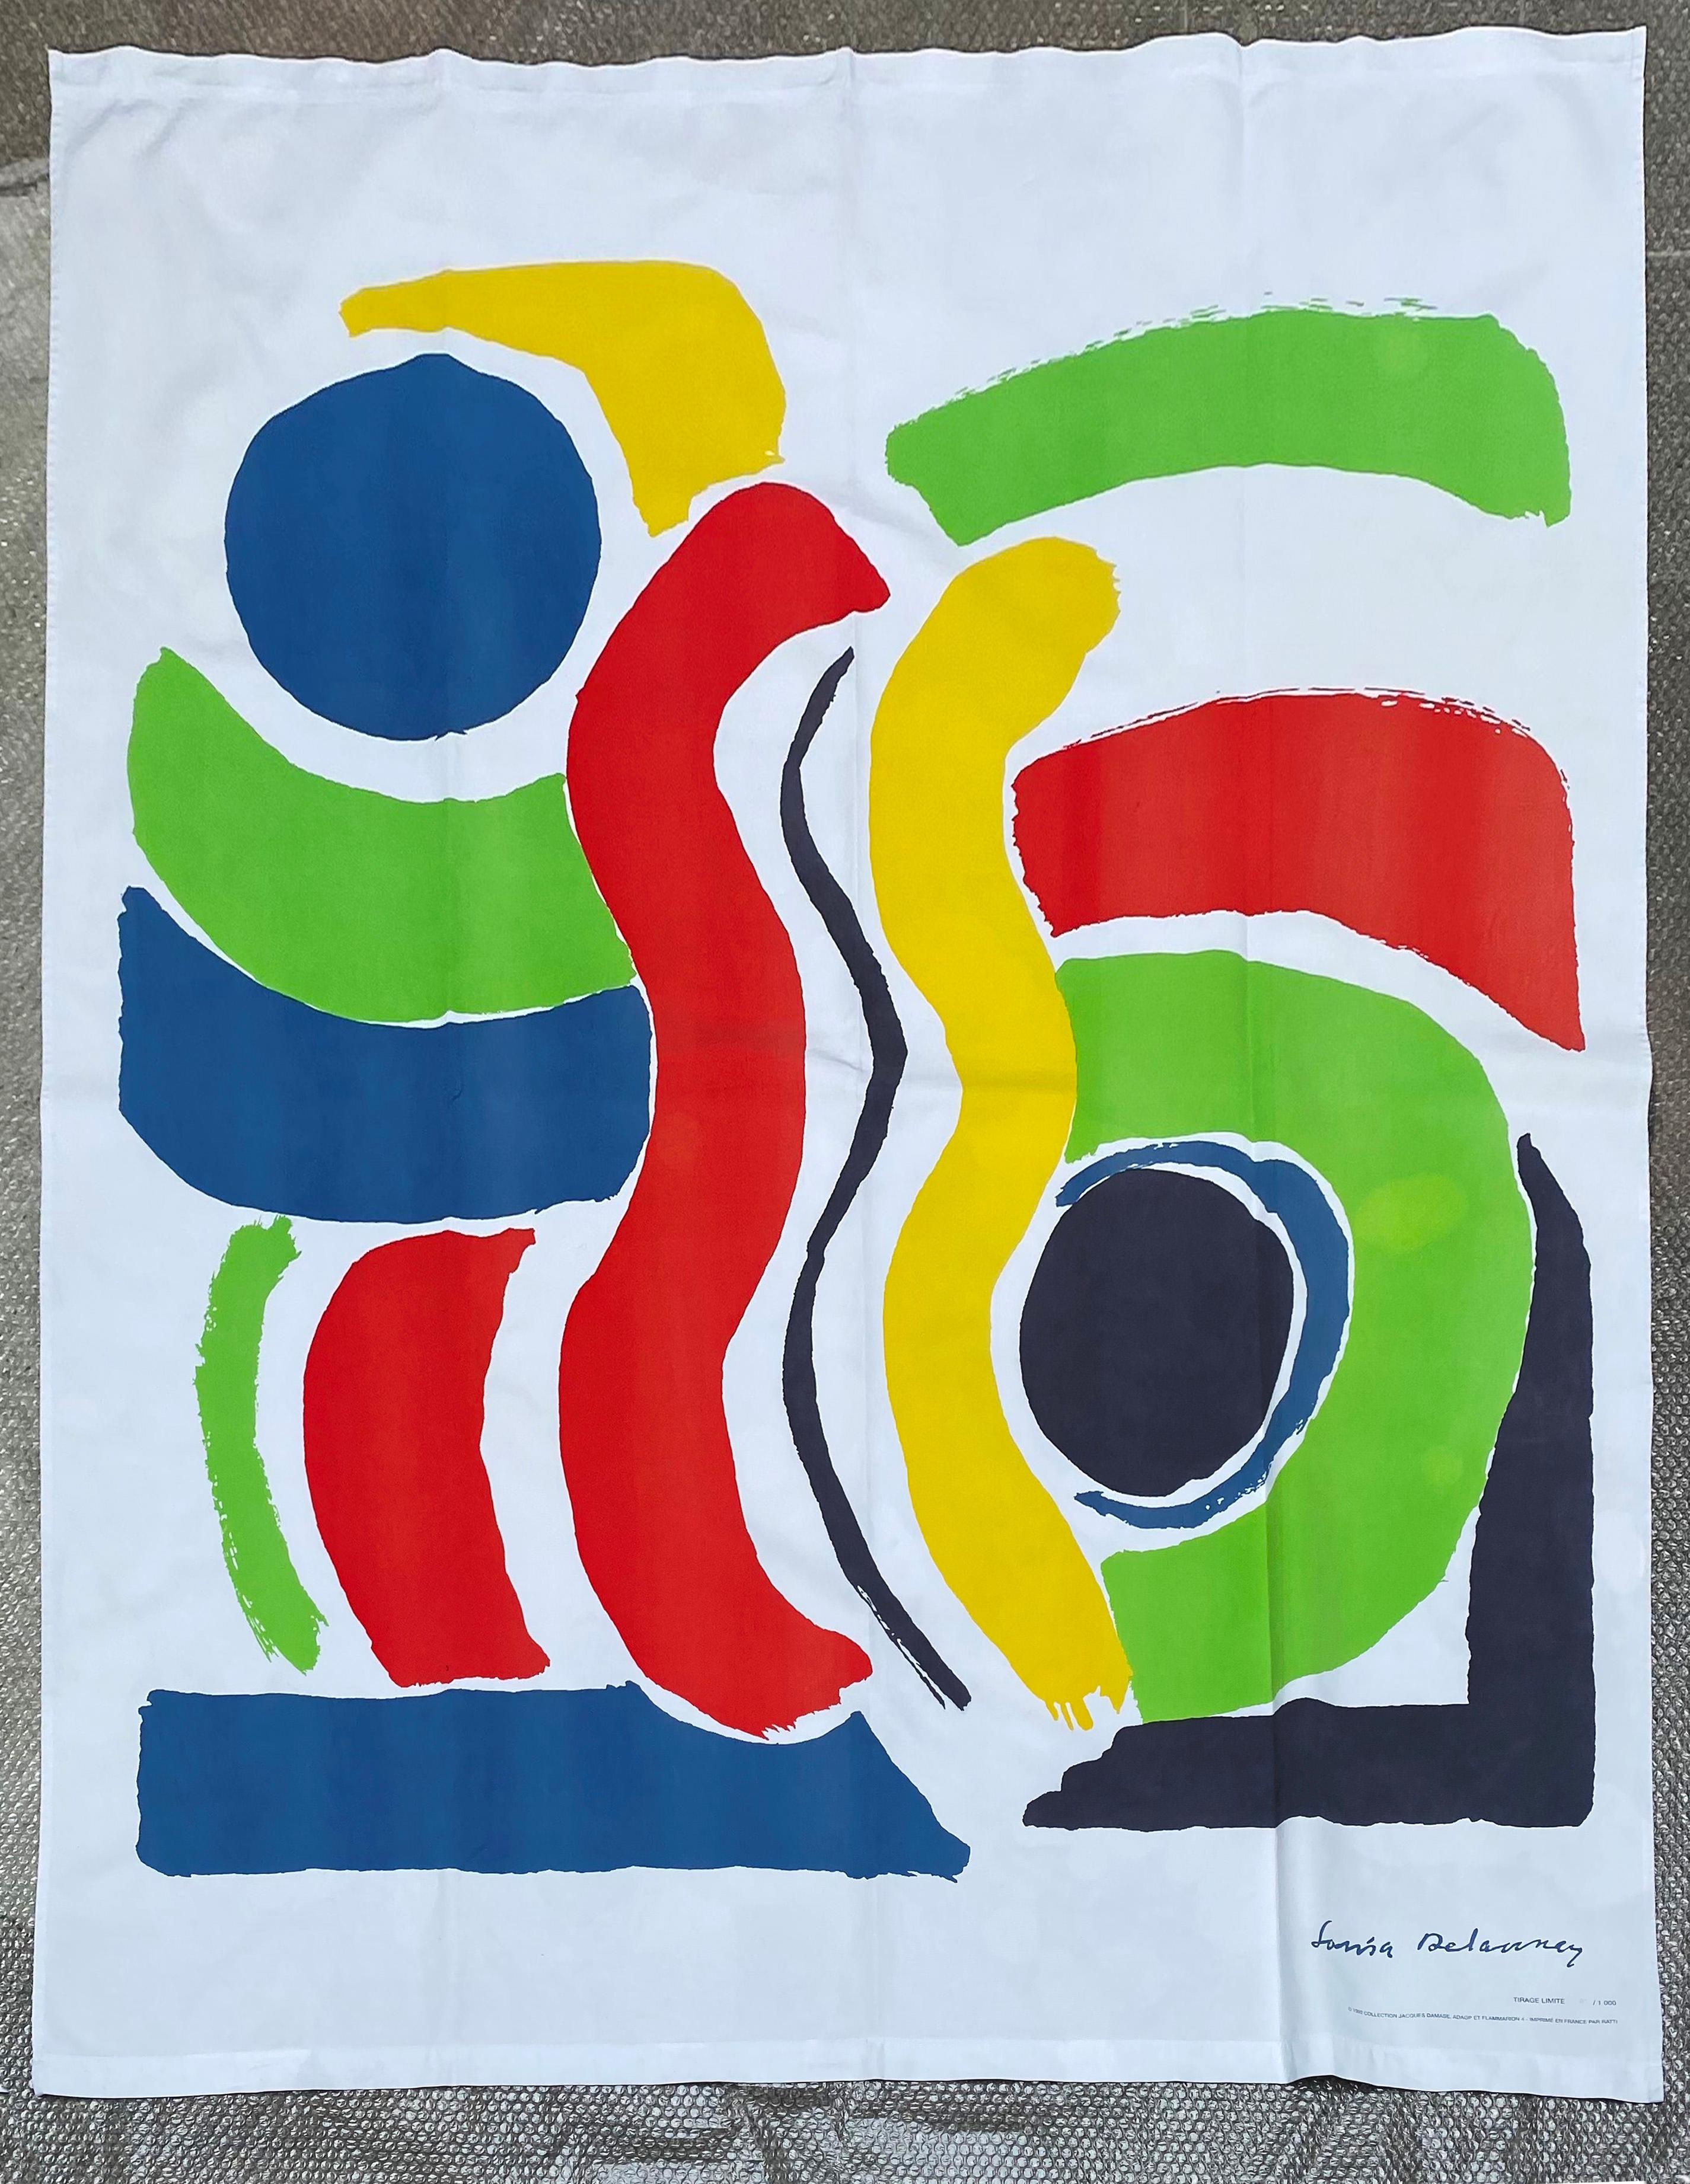 Sonia DELAUNAY (1885-1979), after
